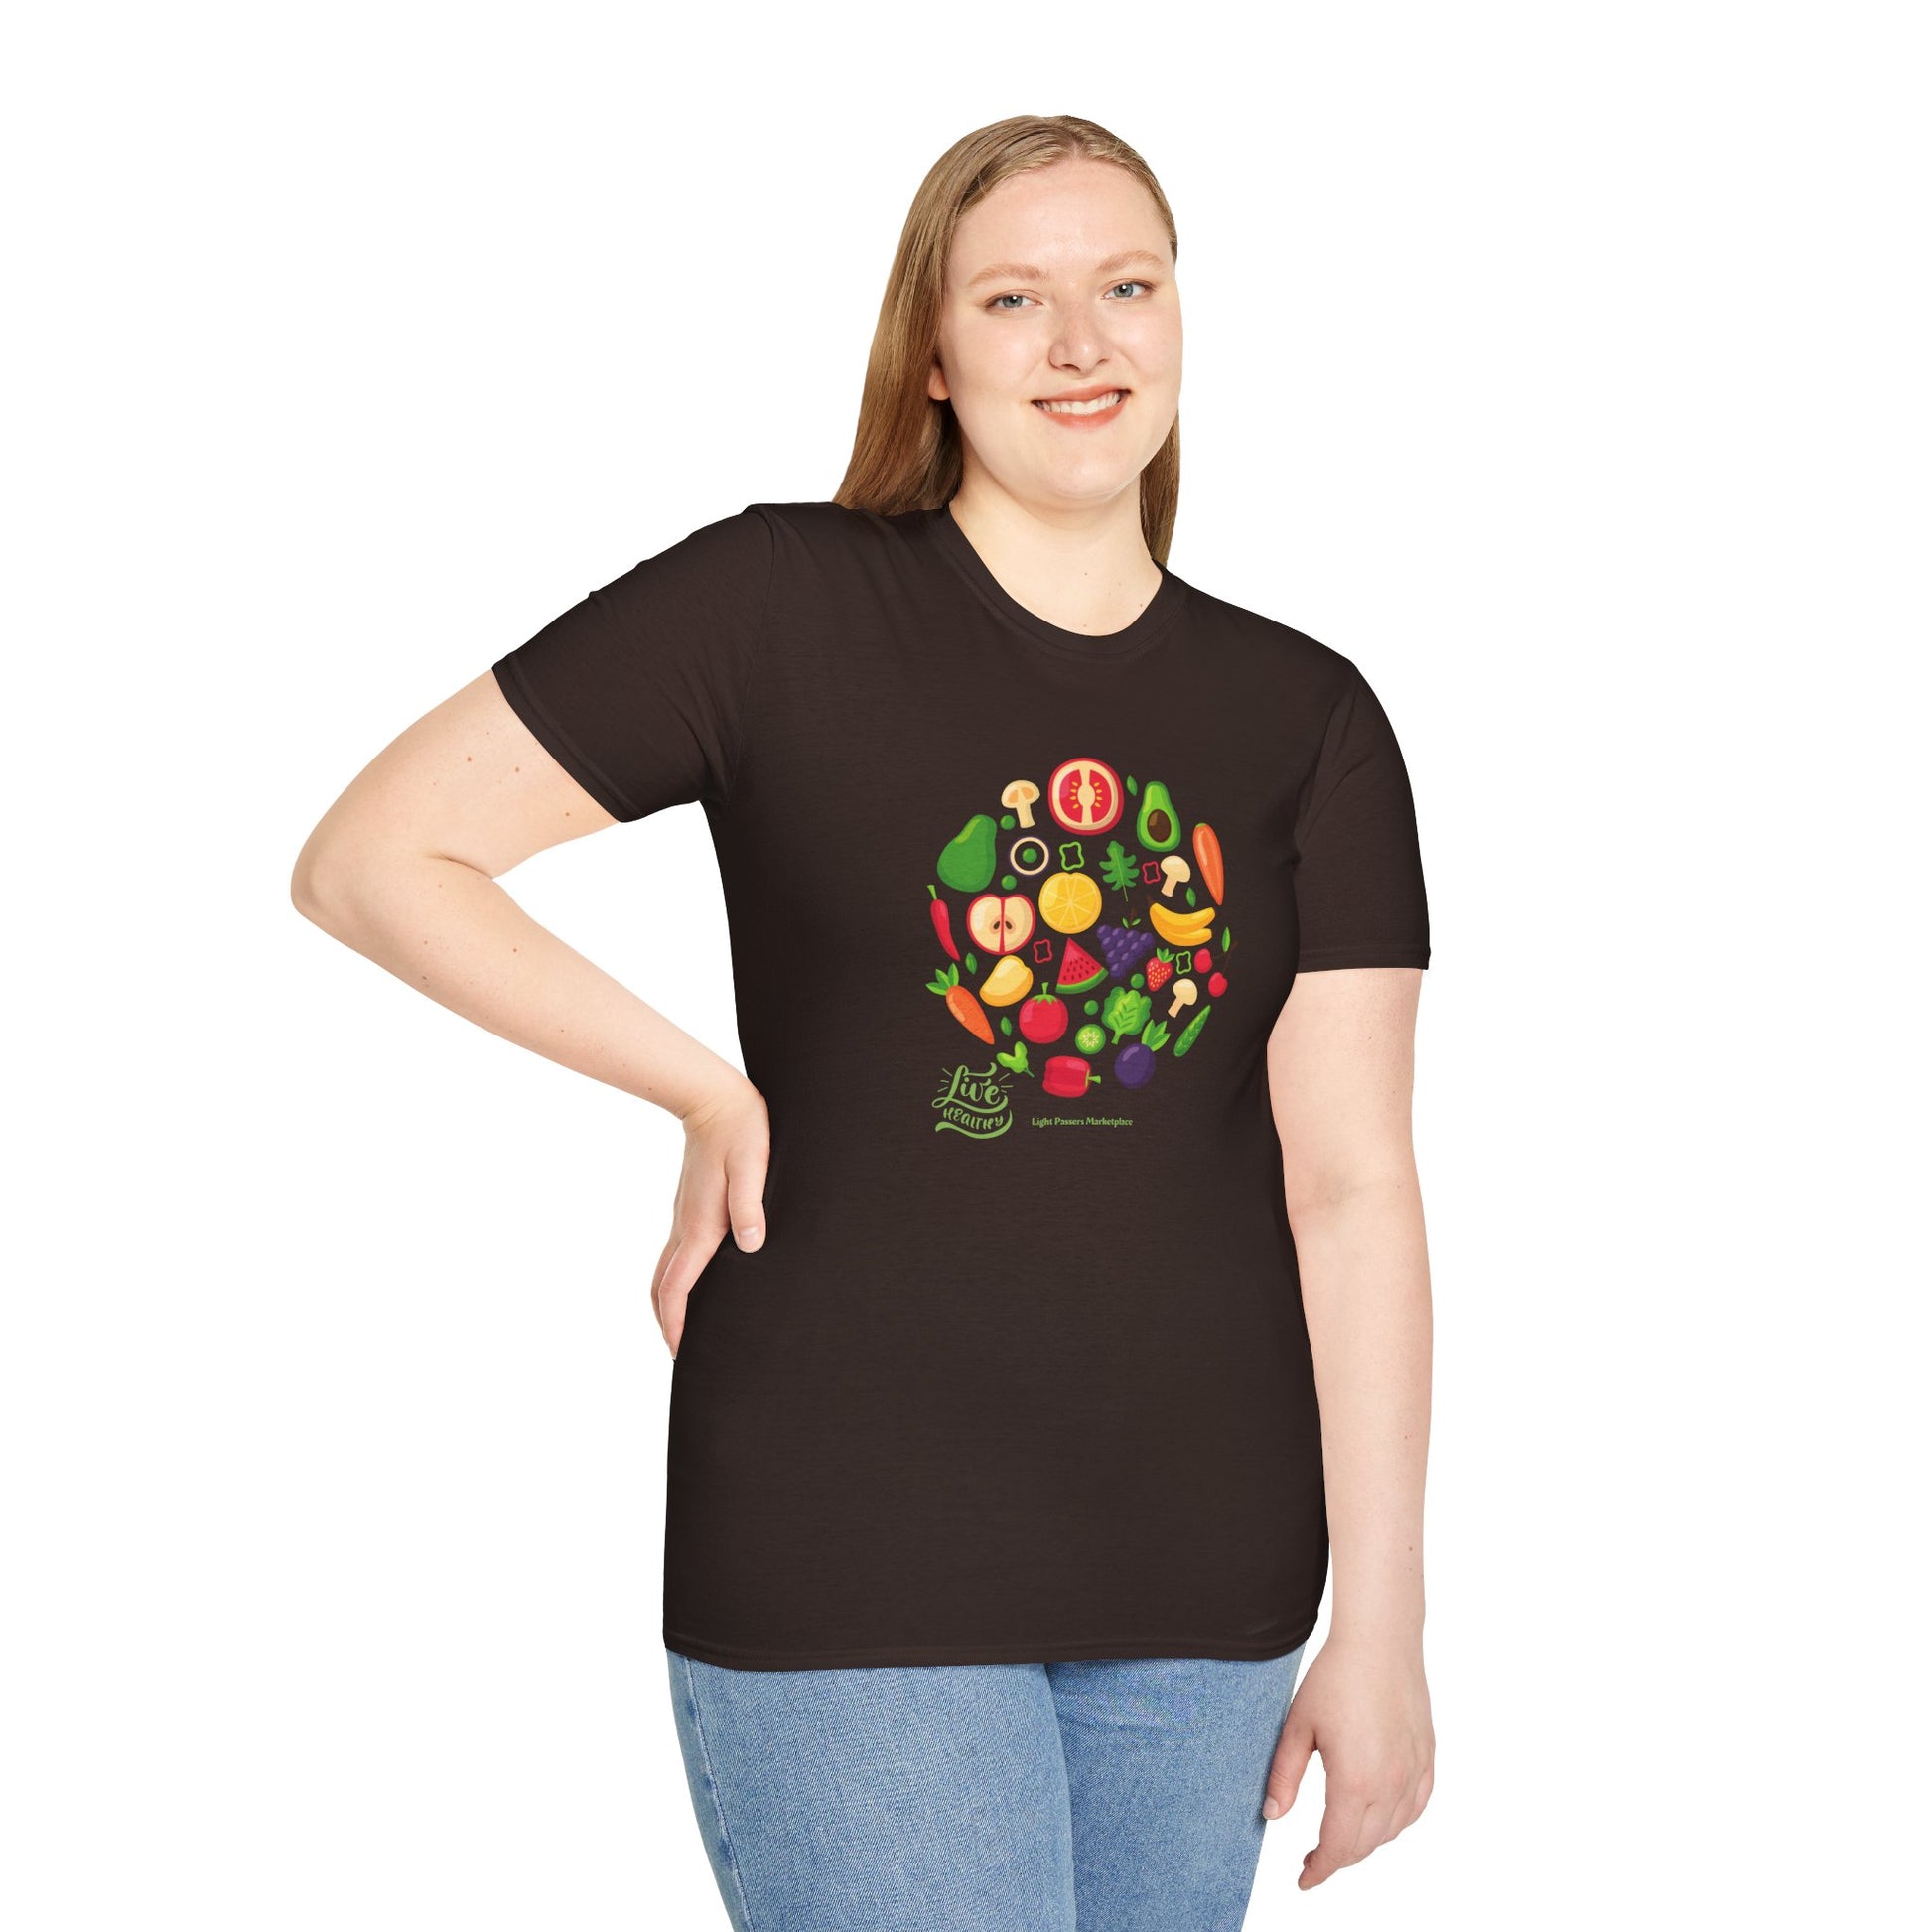 A woman in a black fruit design shirt smiles, showcasing the Live Healthy Unisex T-Shirt. The image features a casual, soft-style tee made of 100% ring-spun cotton for comfort and durability.